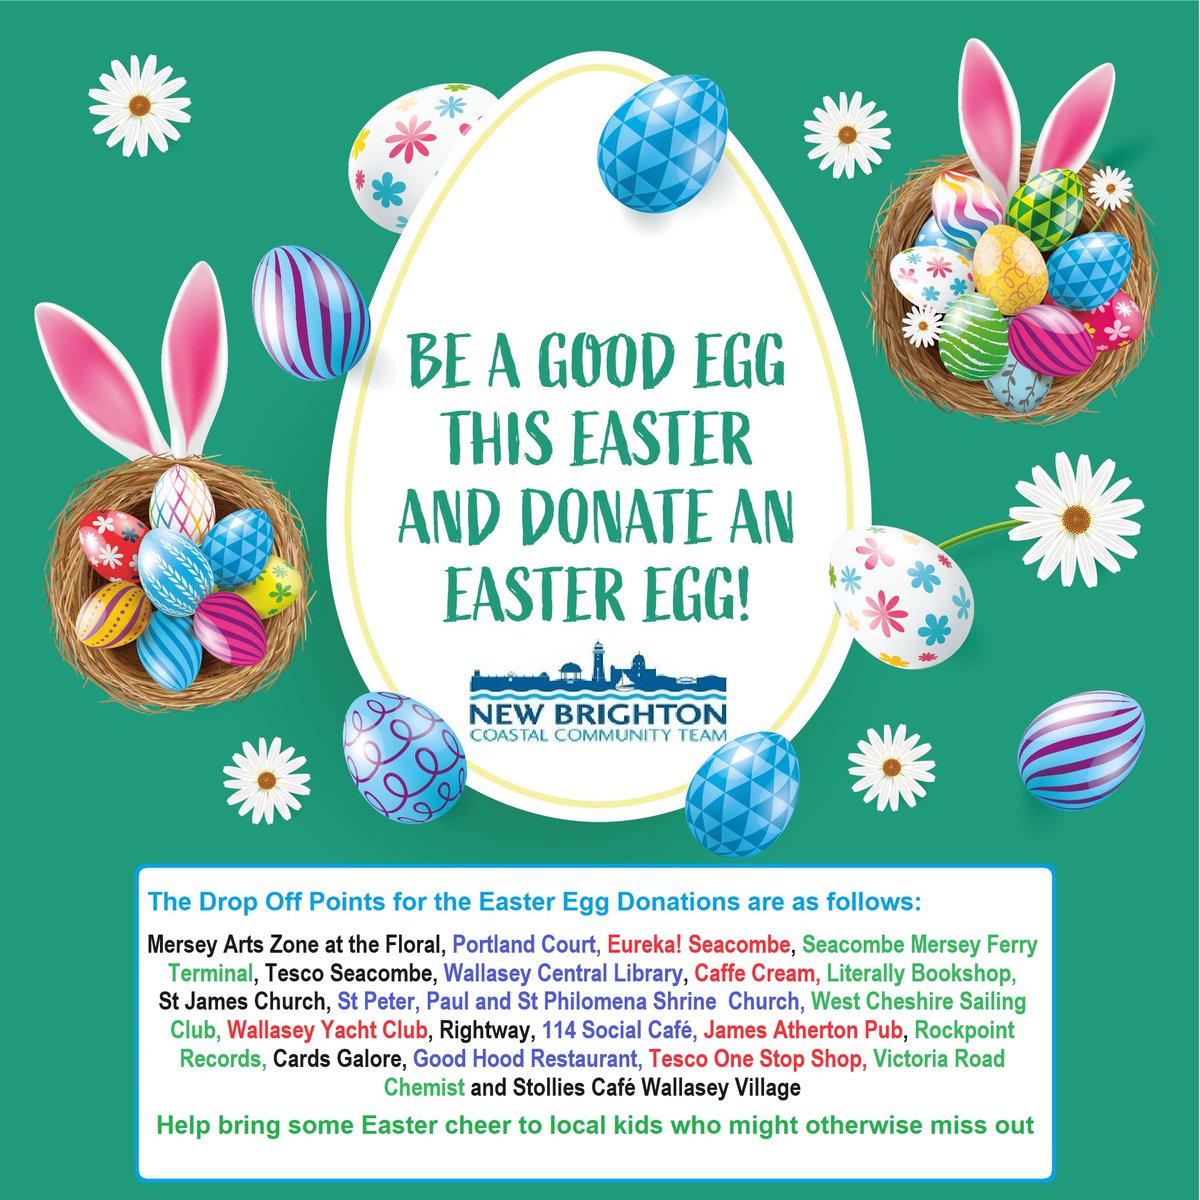 We have had a great start to our annual New Brighton Coastal Community Team Easter Egg Appeal. We have 21 donation stations throughout the New Brighton, Wallasey and Seacombe area. Please make sure no local child misses out by giving generously. Thanking you in advance!!